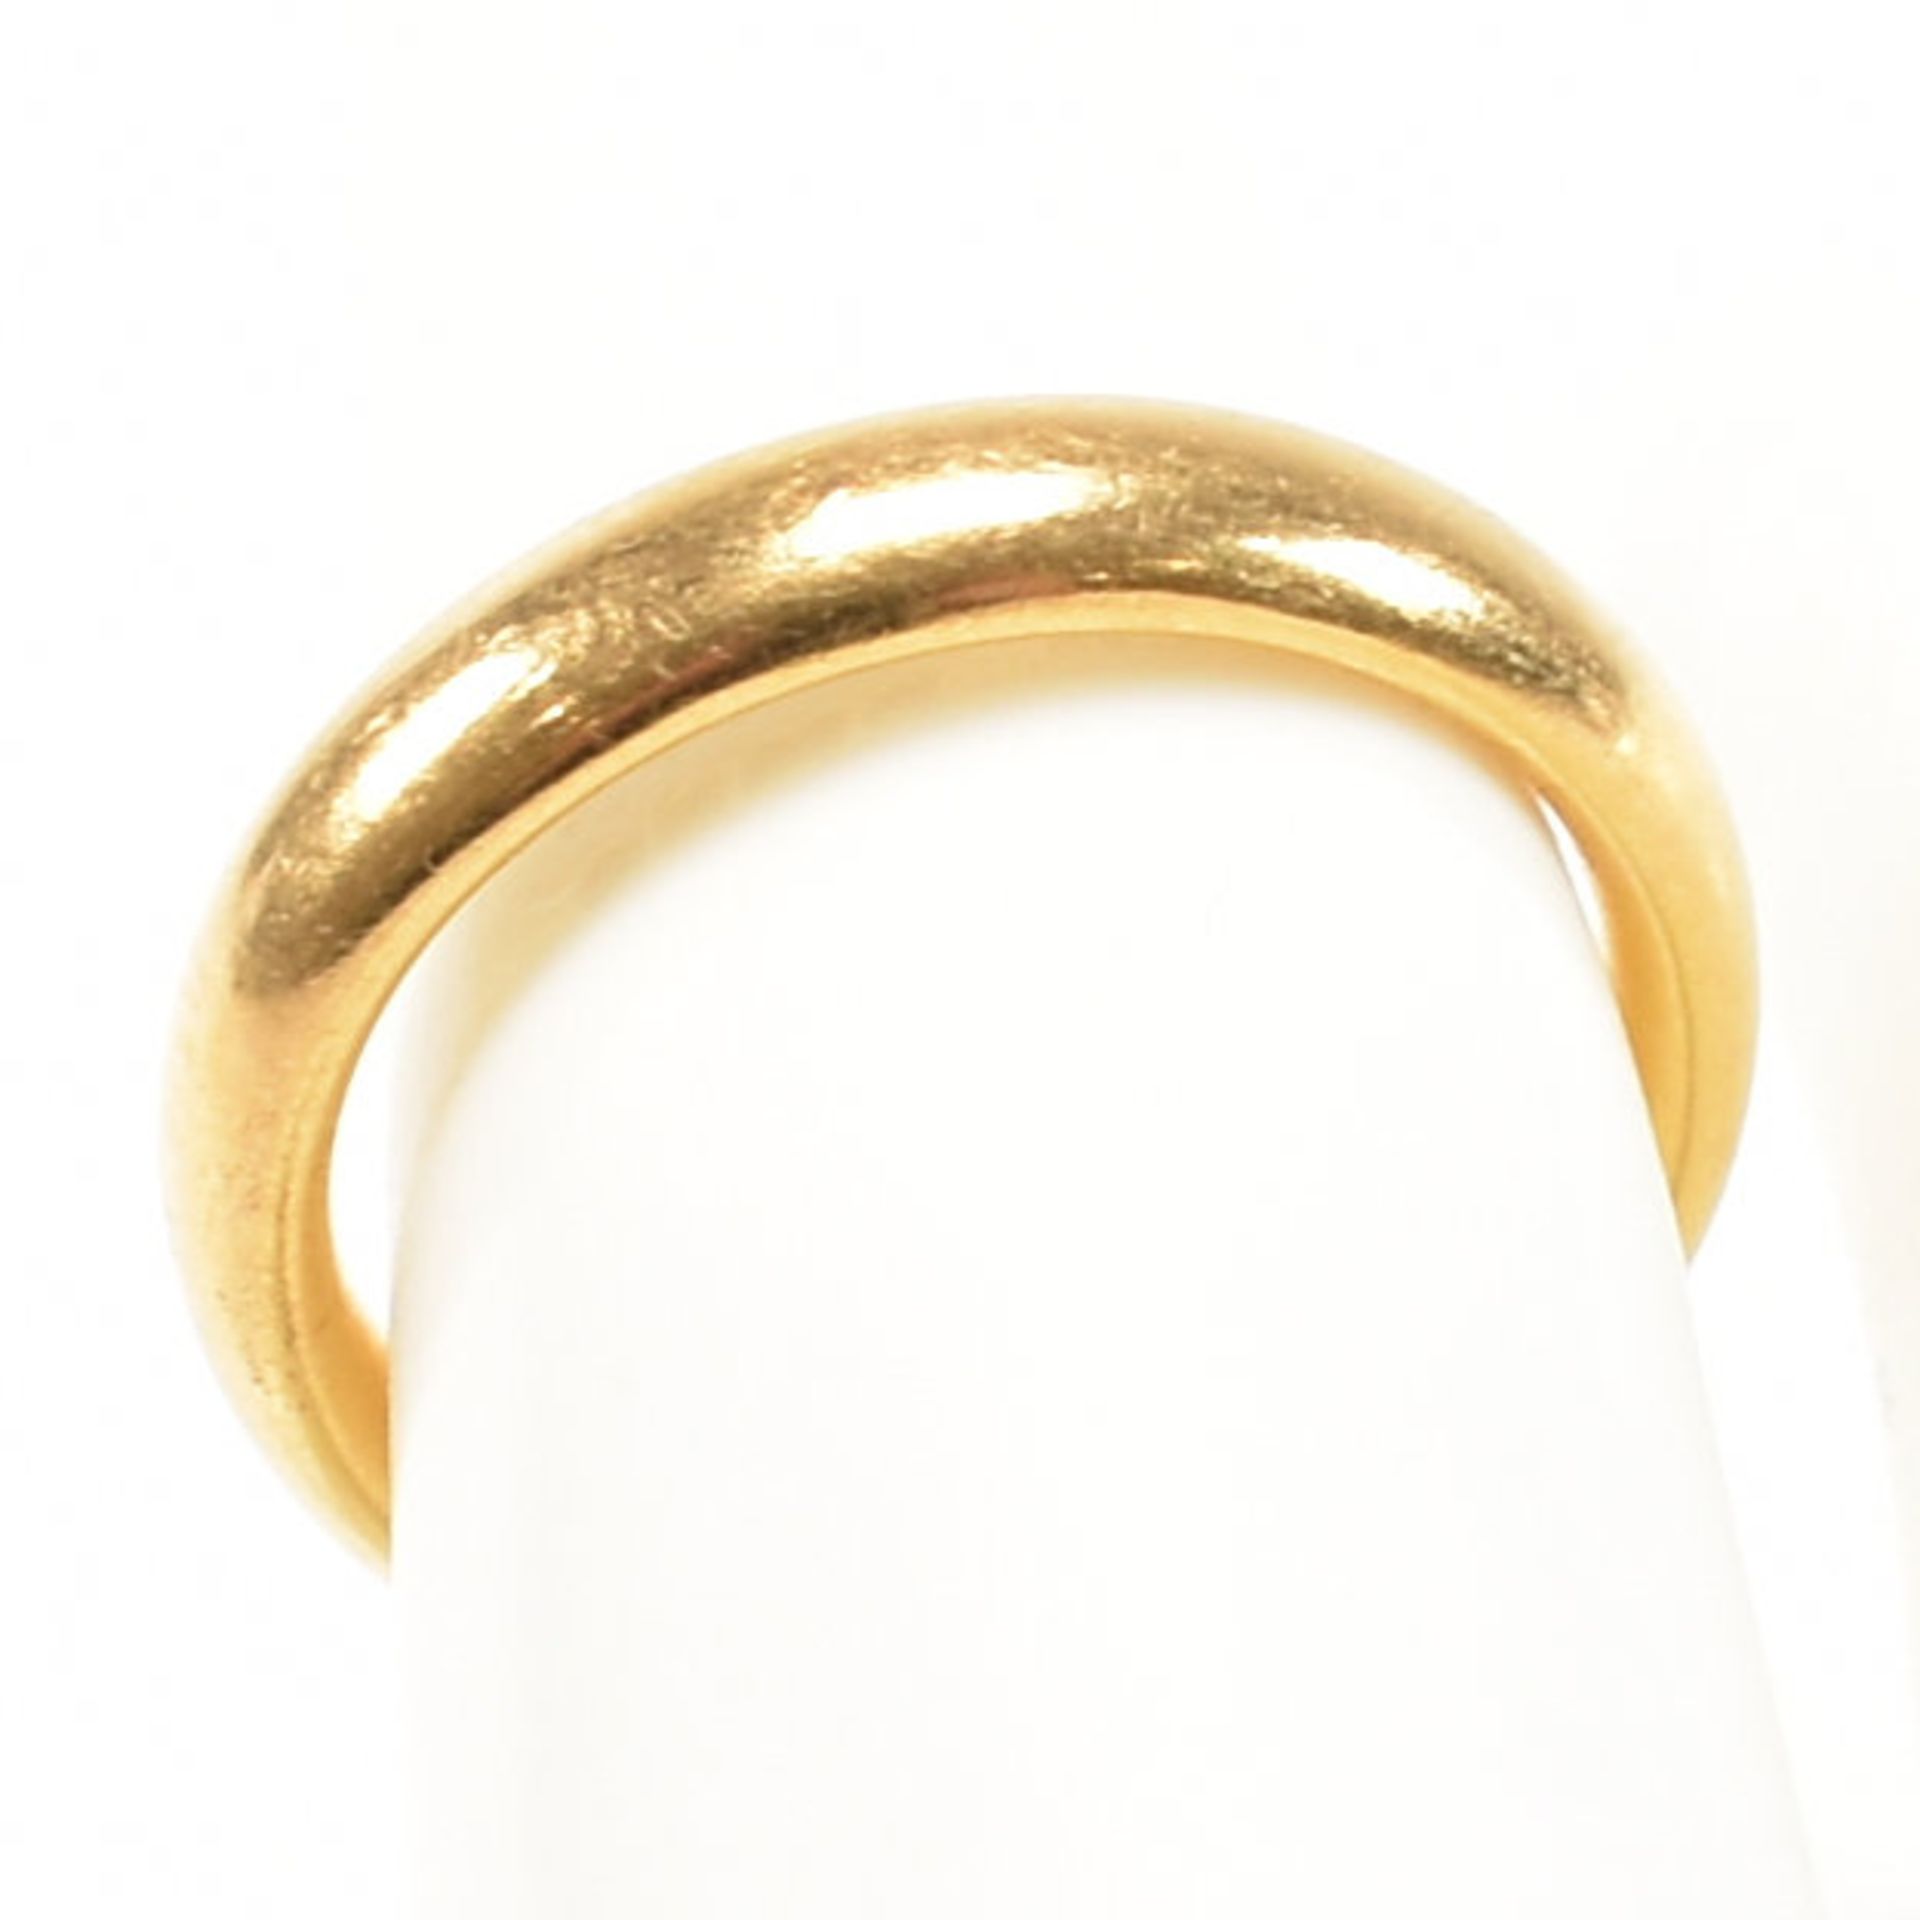 HALLMARKED 22CT GOLD BAND RING - Image 8 of 8